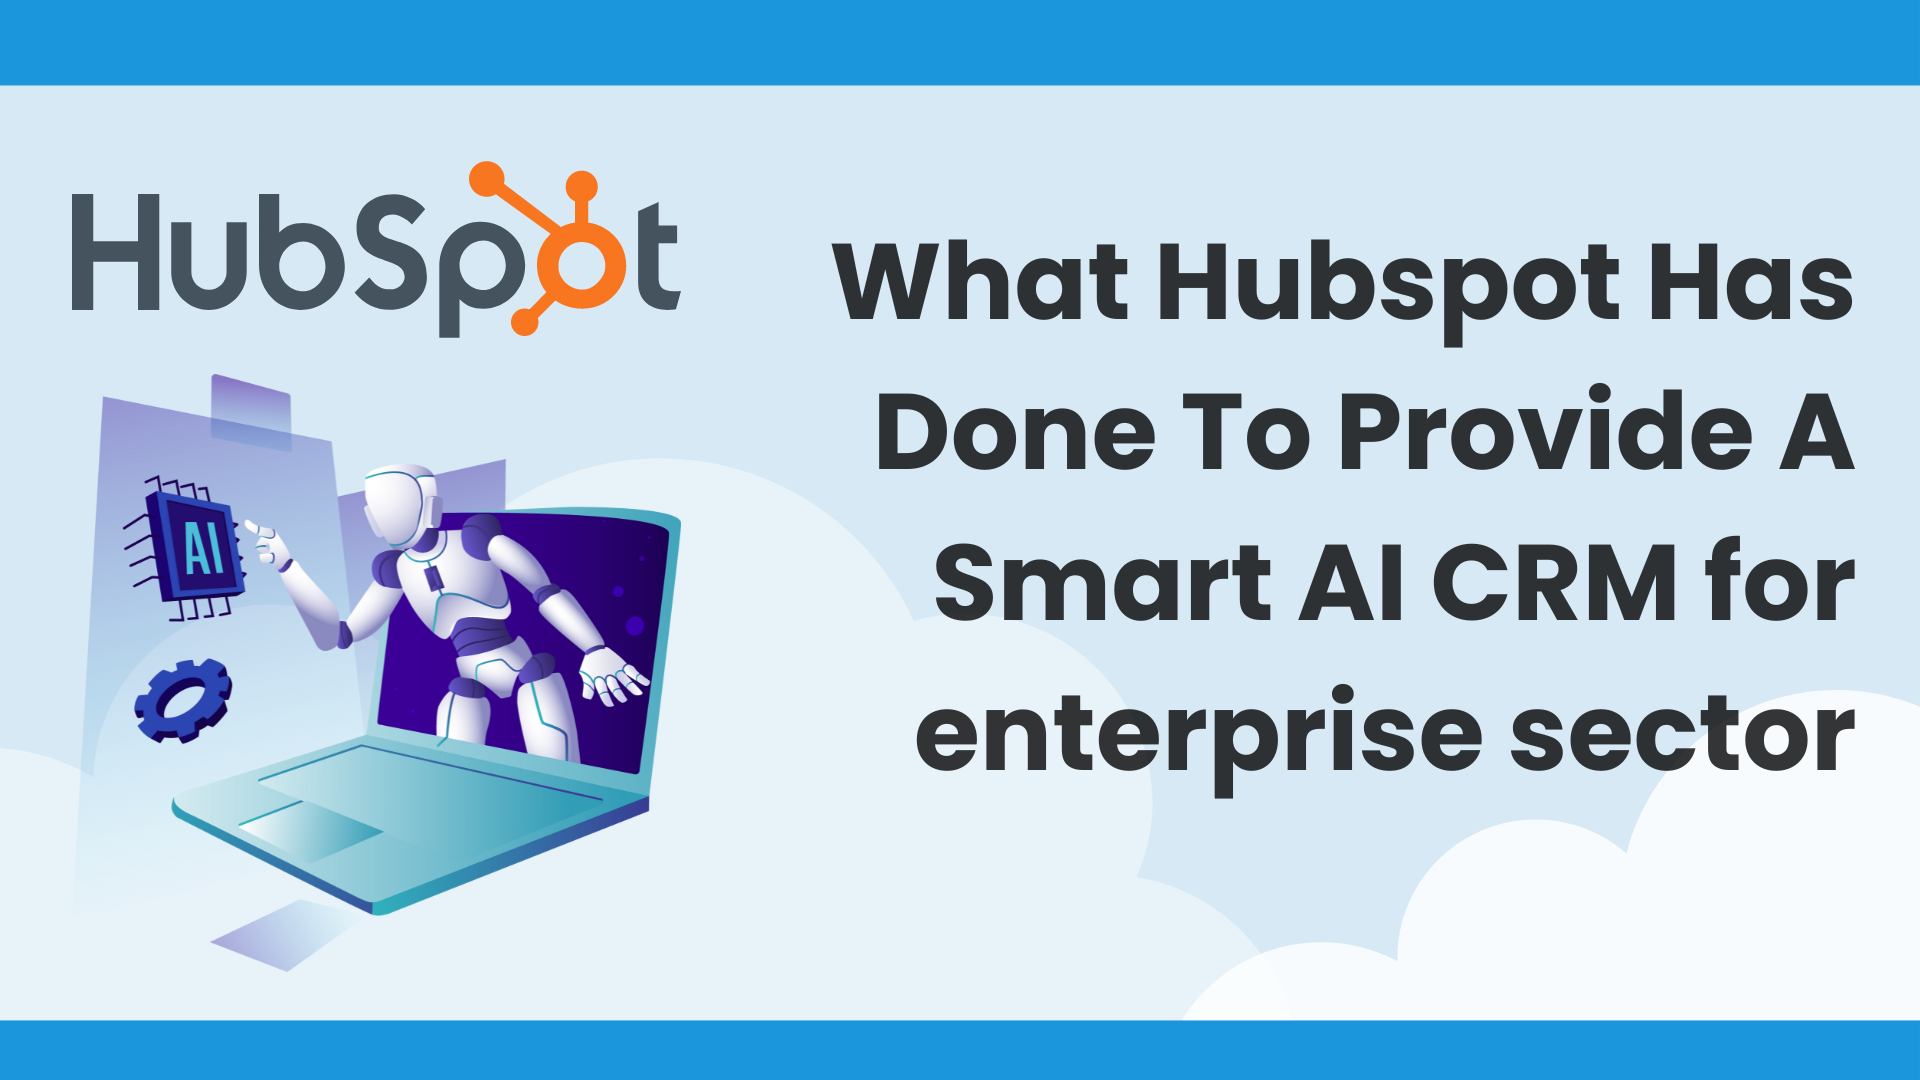 What Hubspot Has Done To Provide A Smart AI CRM for enterprise sector